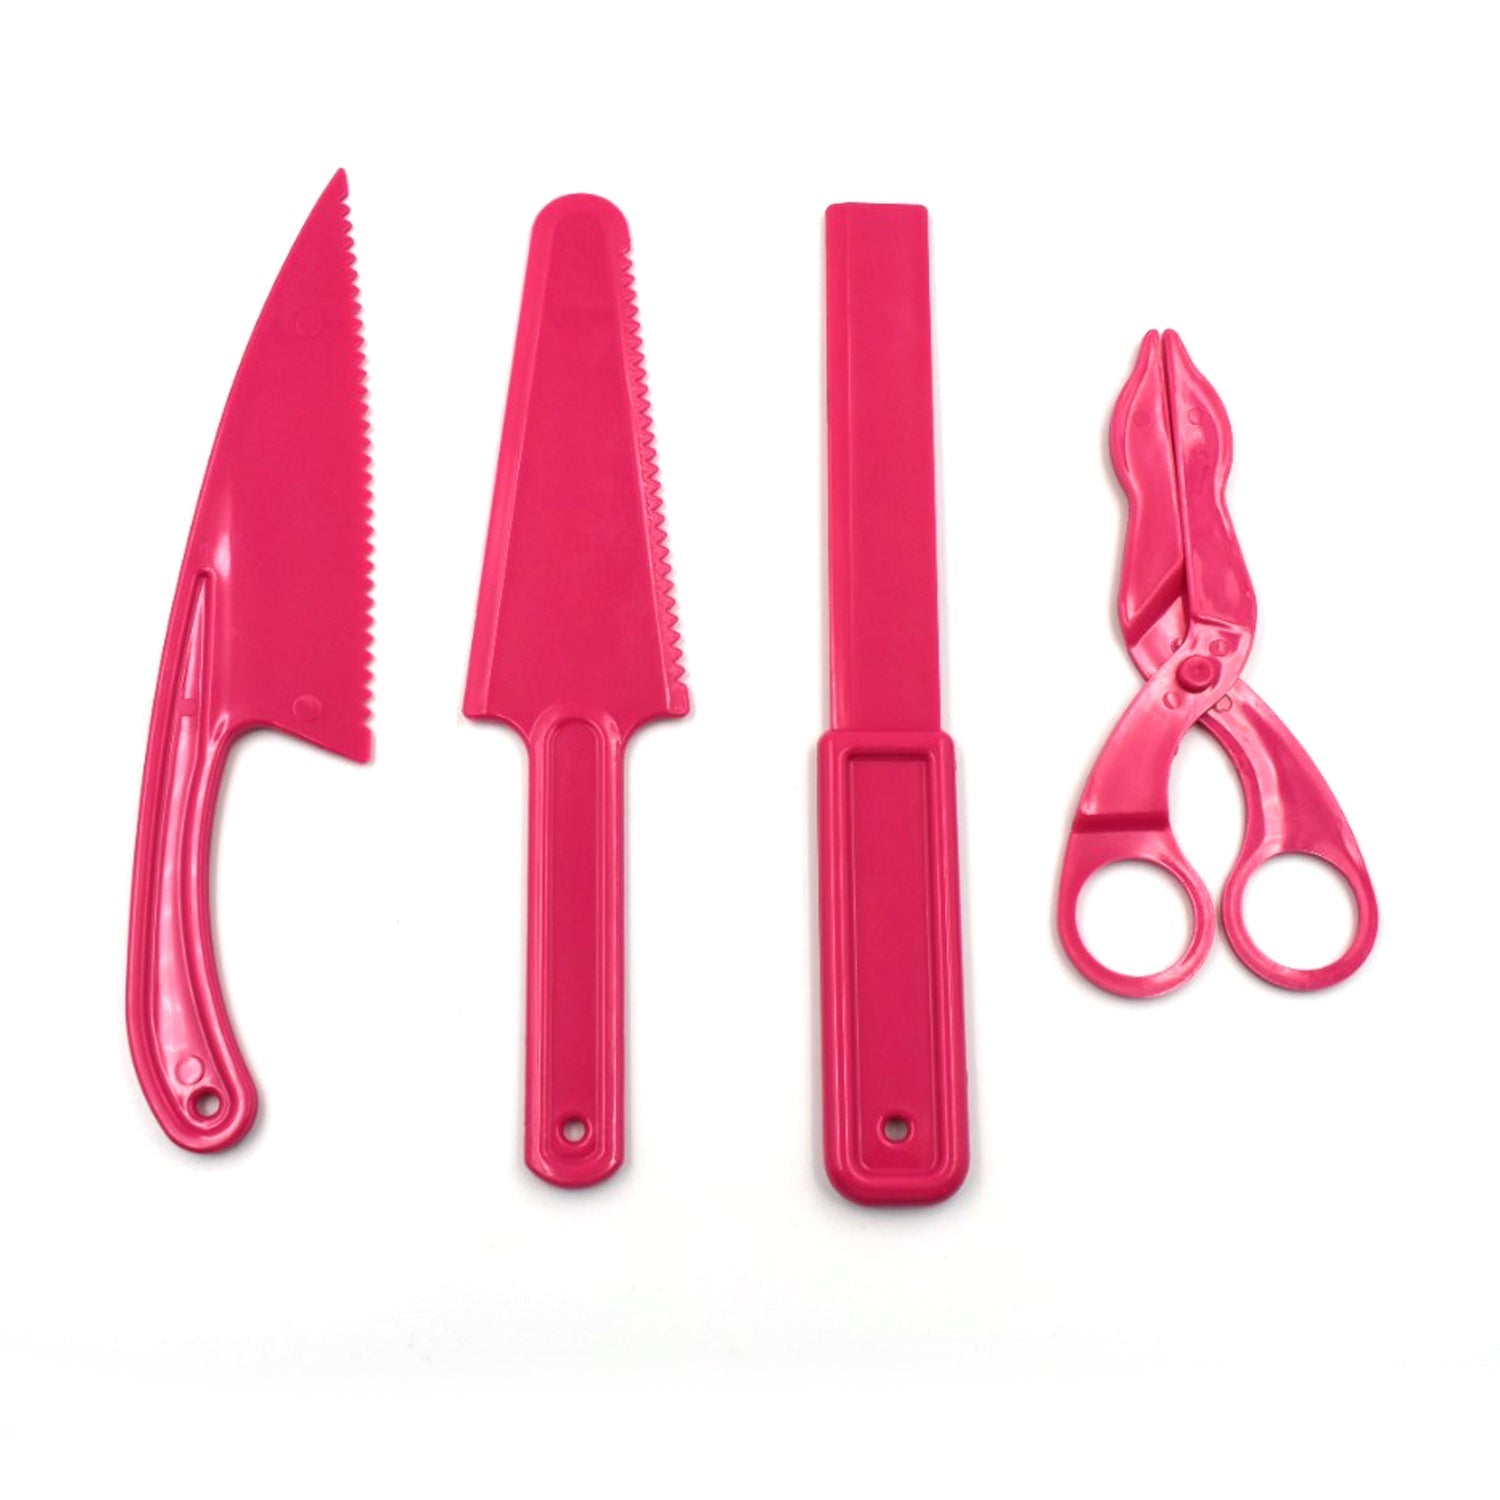 2691 16 Pc Cake Decor Tools used while making of cakes and pastries in all kinds of places like household and bakery etc.